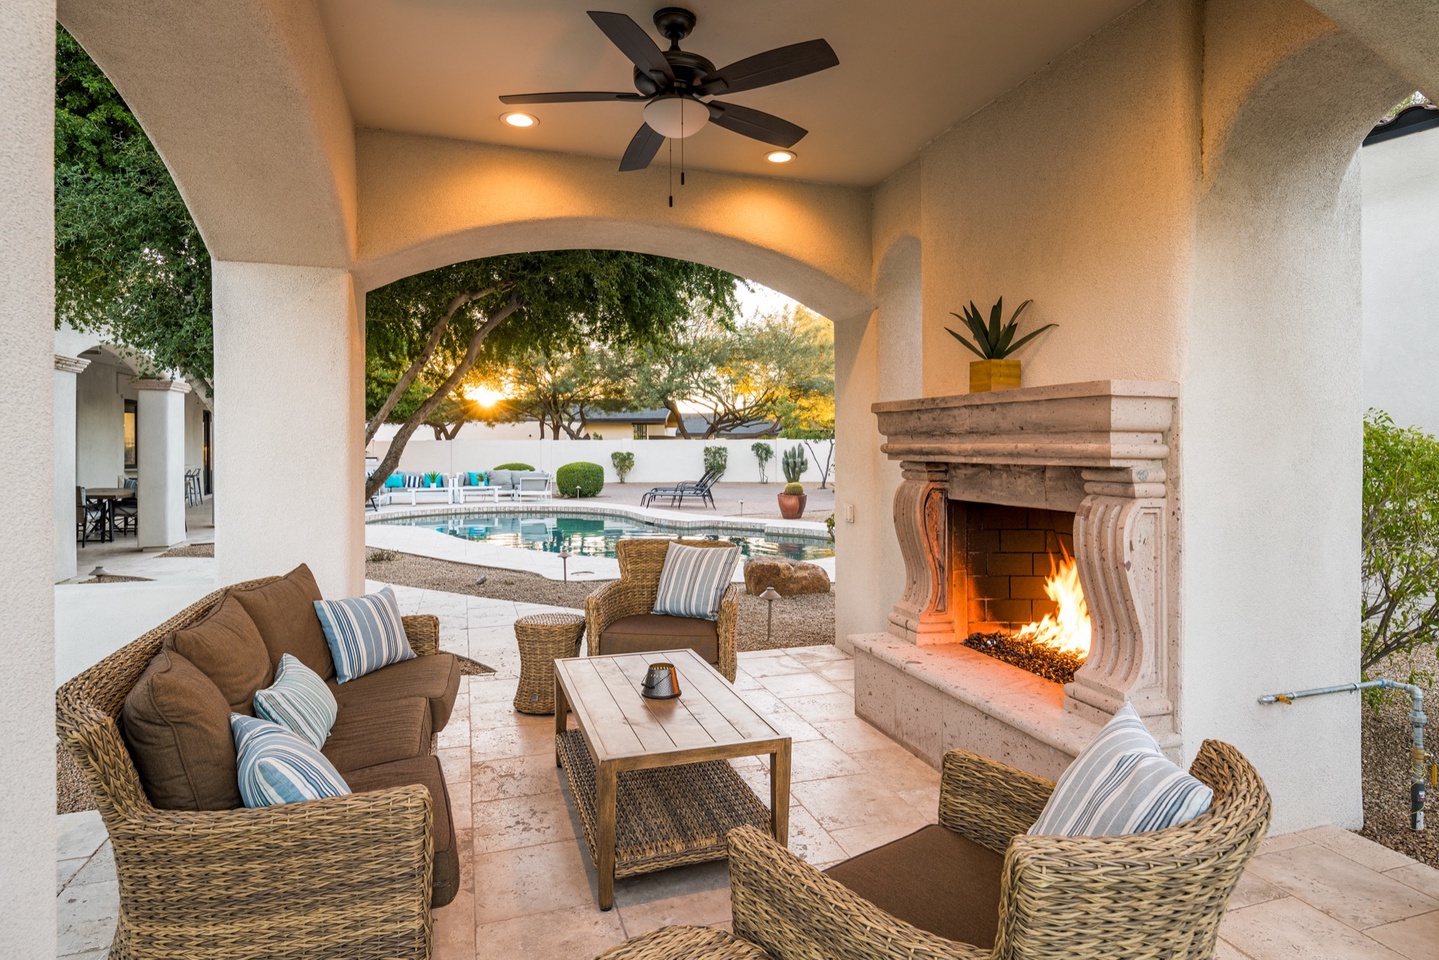 Outdoor fireplace with comfortable seating